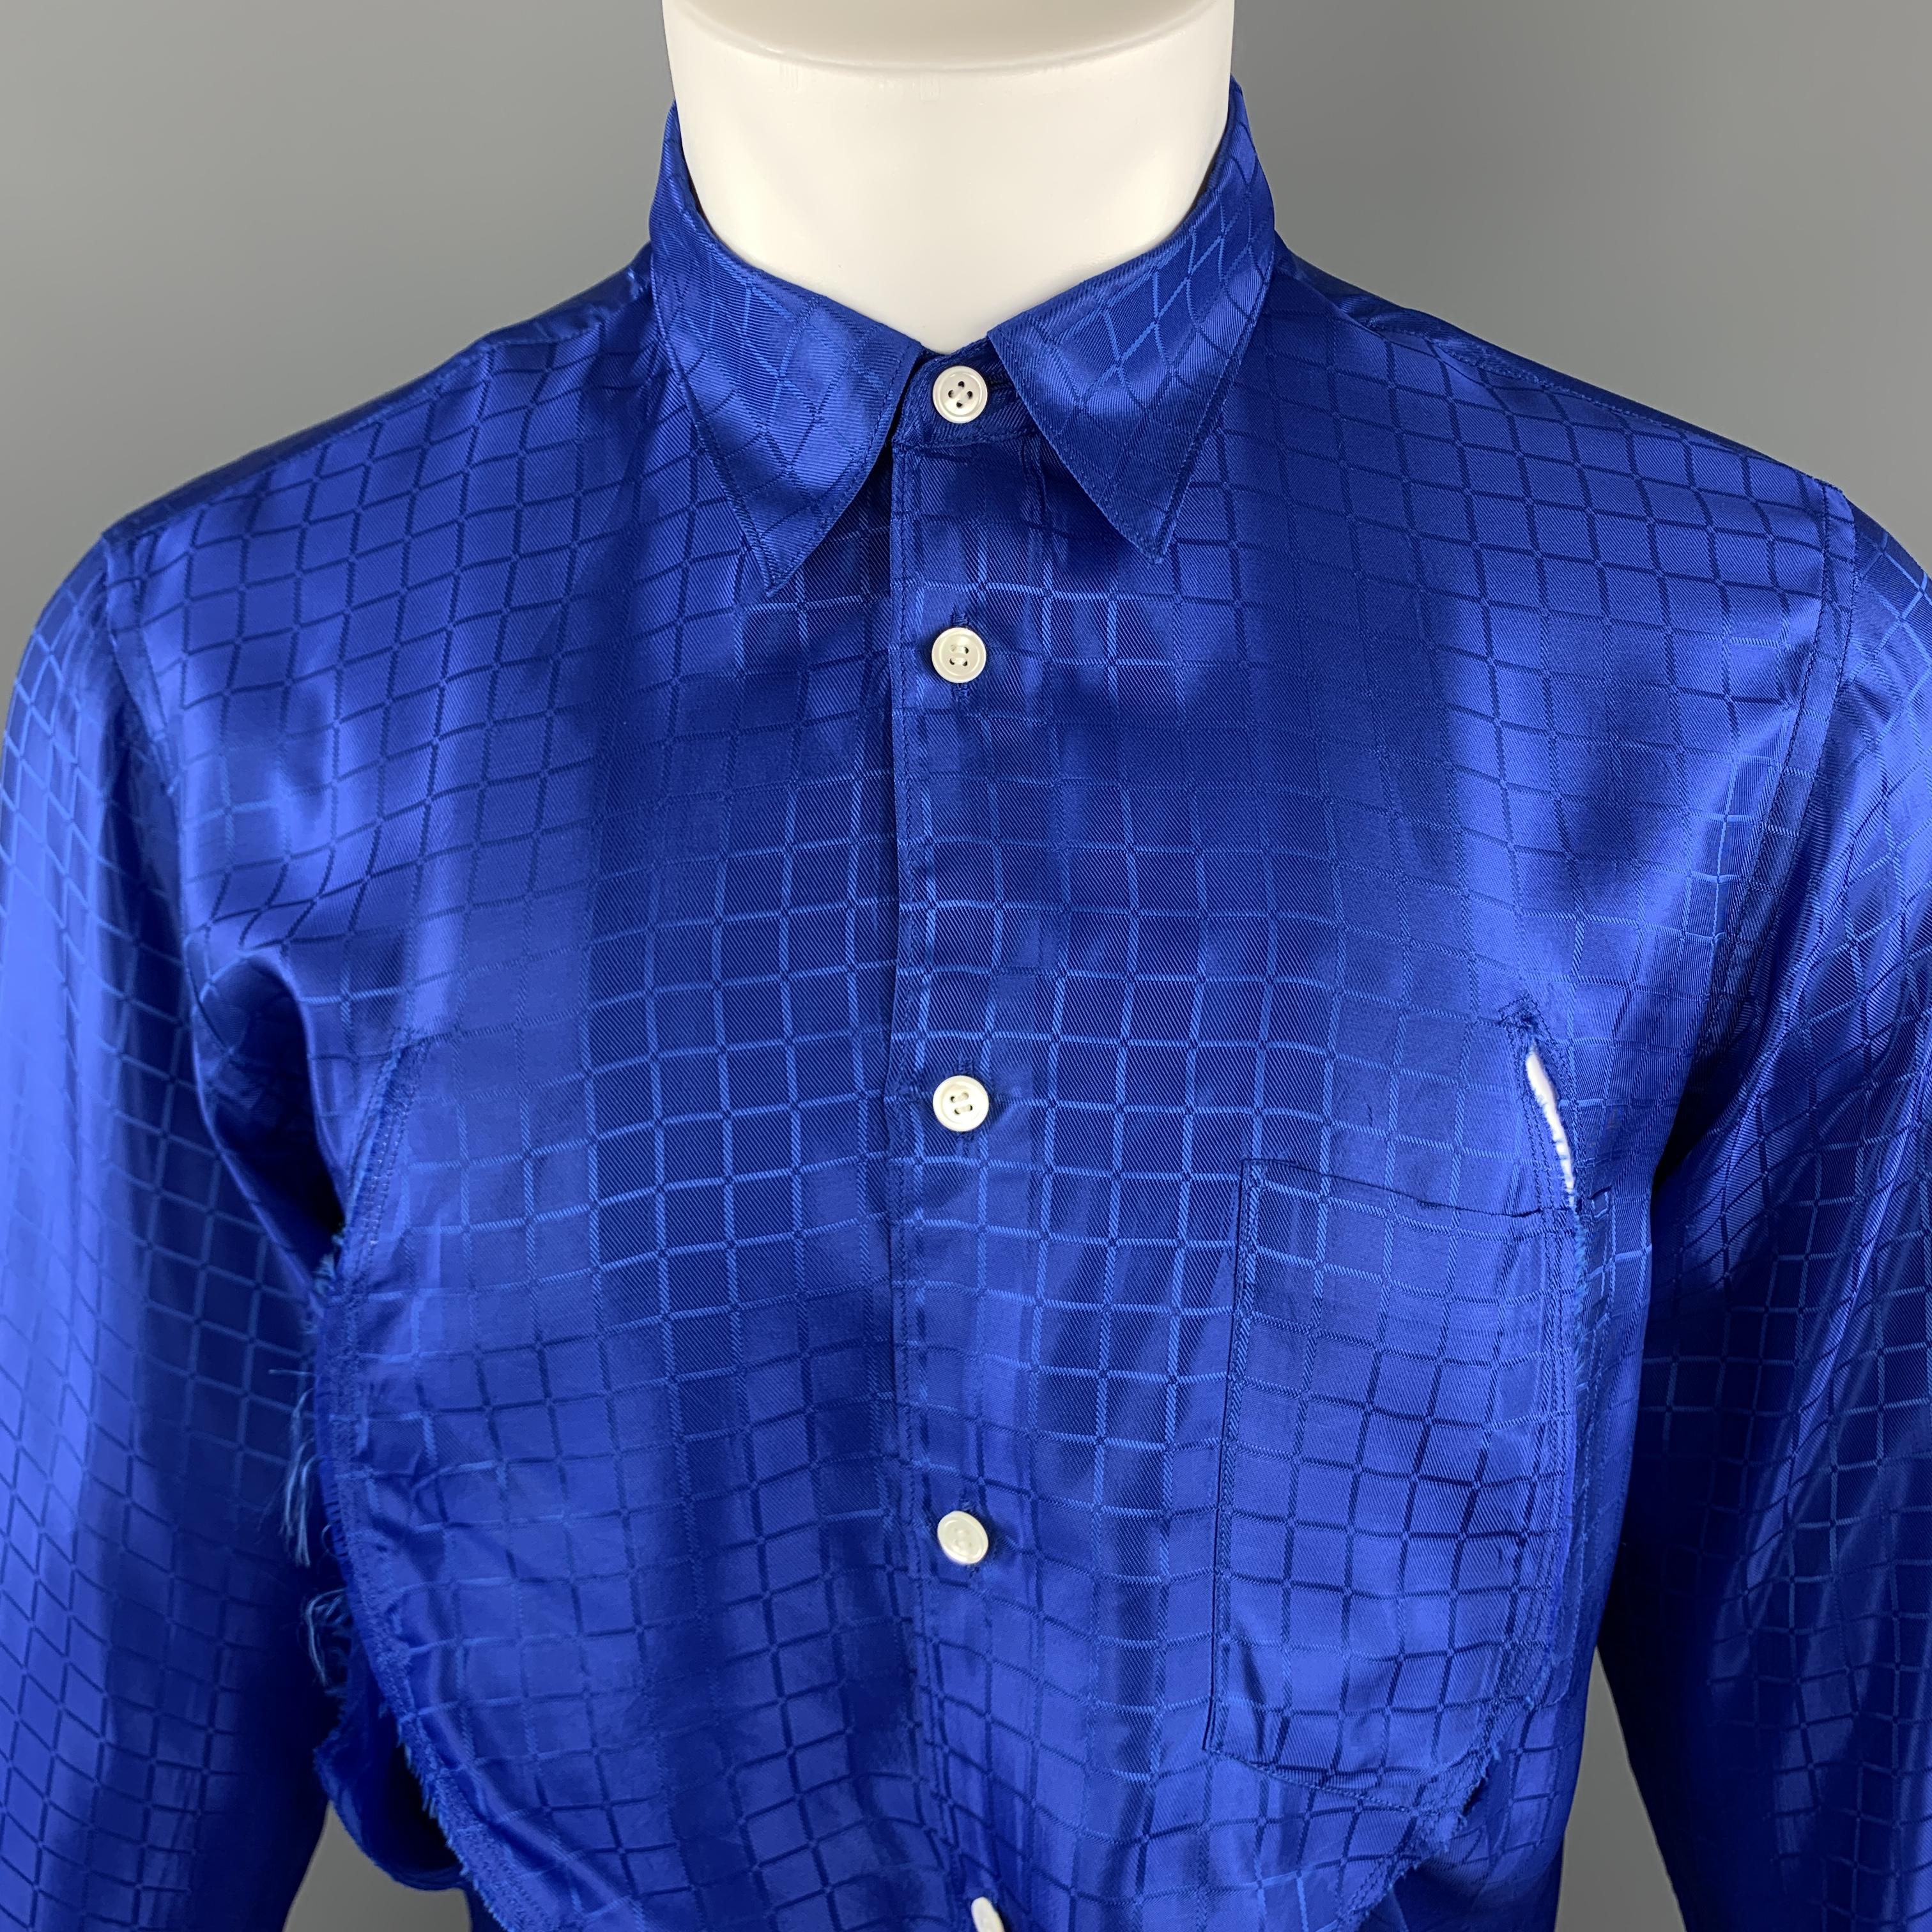 COMME des GARCONS HOMME PLUS long sleeve shirt comes in a window pane blue C pattern acetate / rayon material, featuring a pointed collar, a patch pocket, suspenders, a cut out front, and buttoned cuffs. Matching pants available separately. Made in